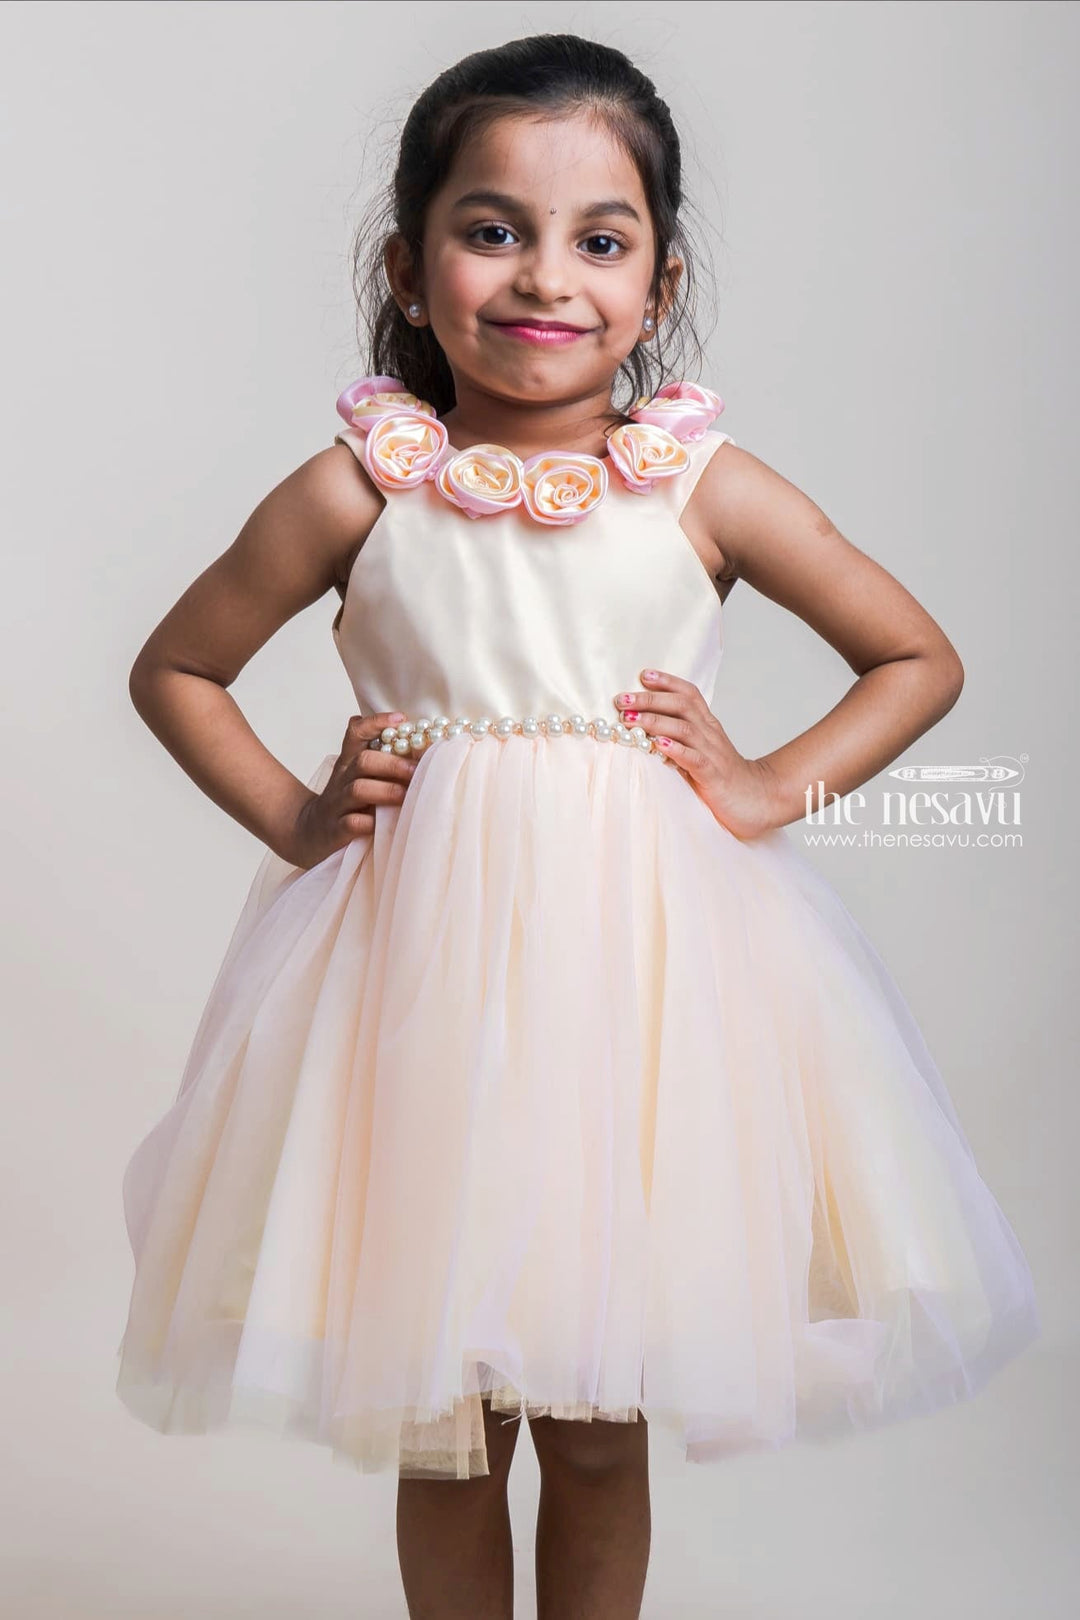 The Nesavu Girls Tutu Frock Elegant Pink Net Frock With Floral Embellished White Satin Yoke For Girls Nesavu 16 (1Y) / Yellow PF107A-16 White And Pink Birthday Net Gowns| Party Wear Collection| The Nesavu